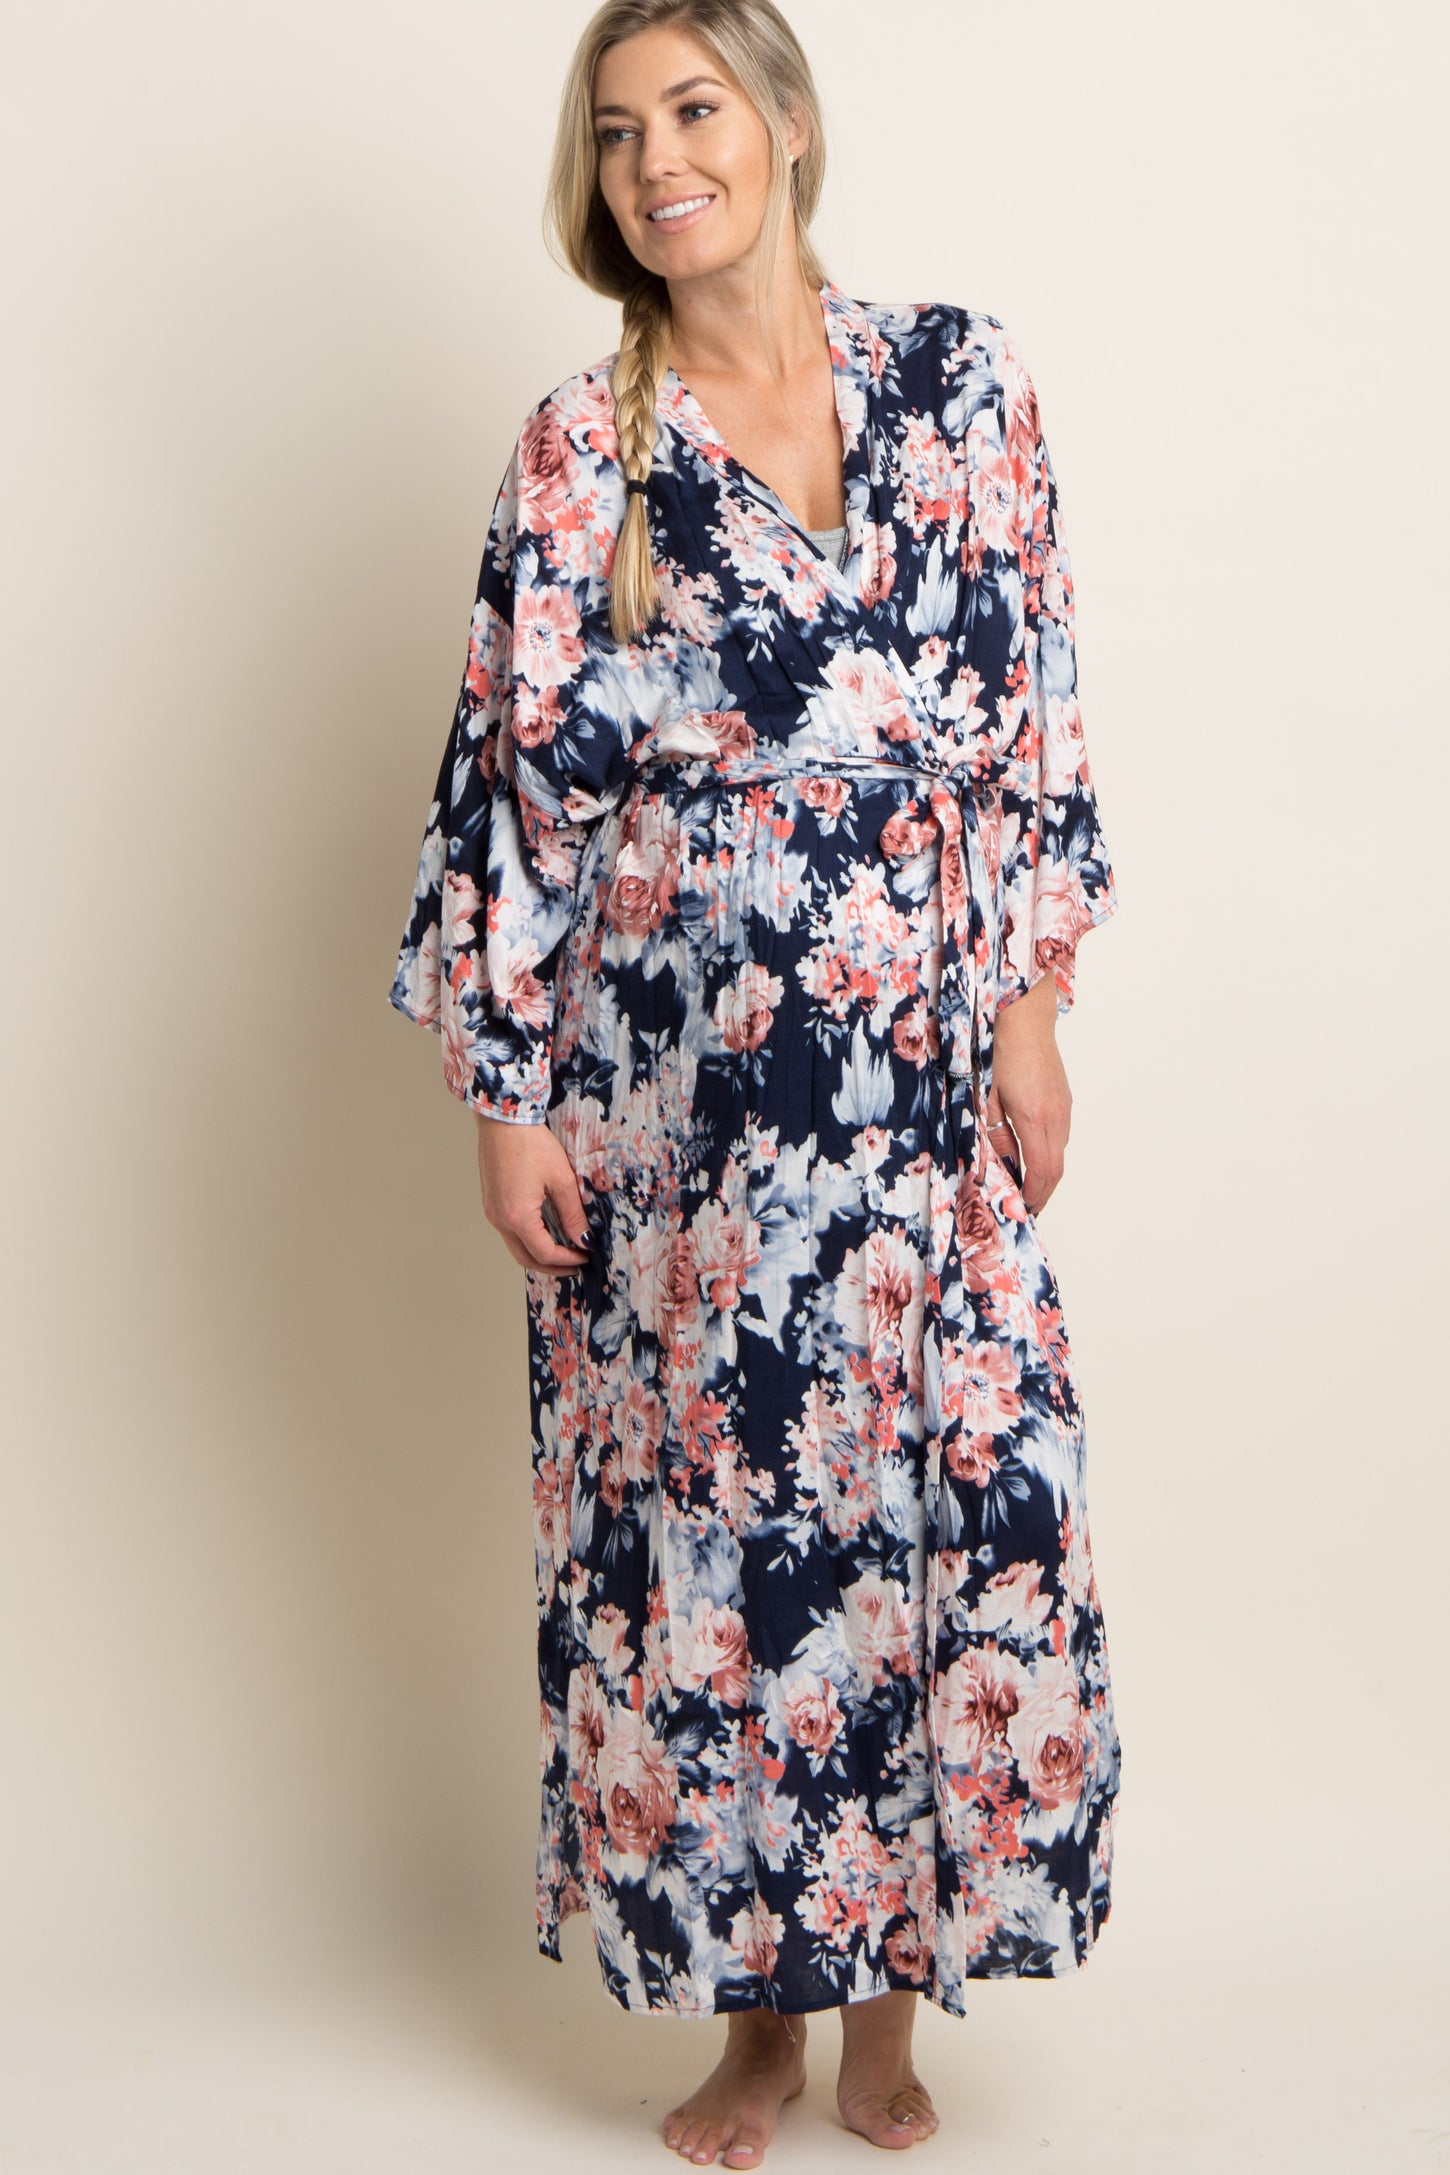 Navy Floral Delivery/Nursing Long Maternity Robe– PinkBlush